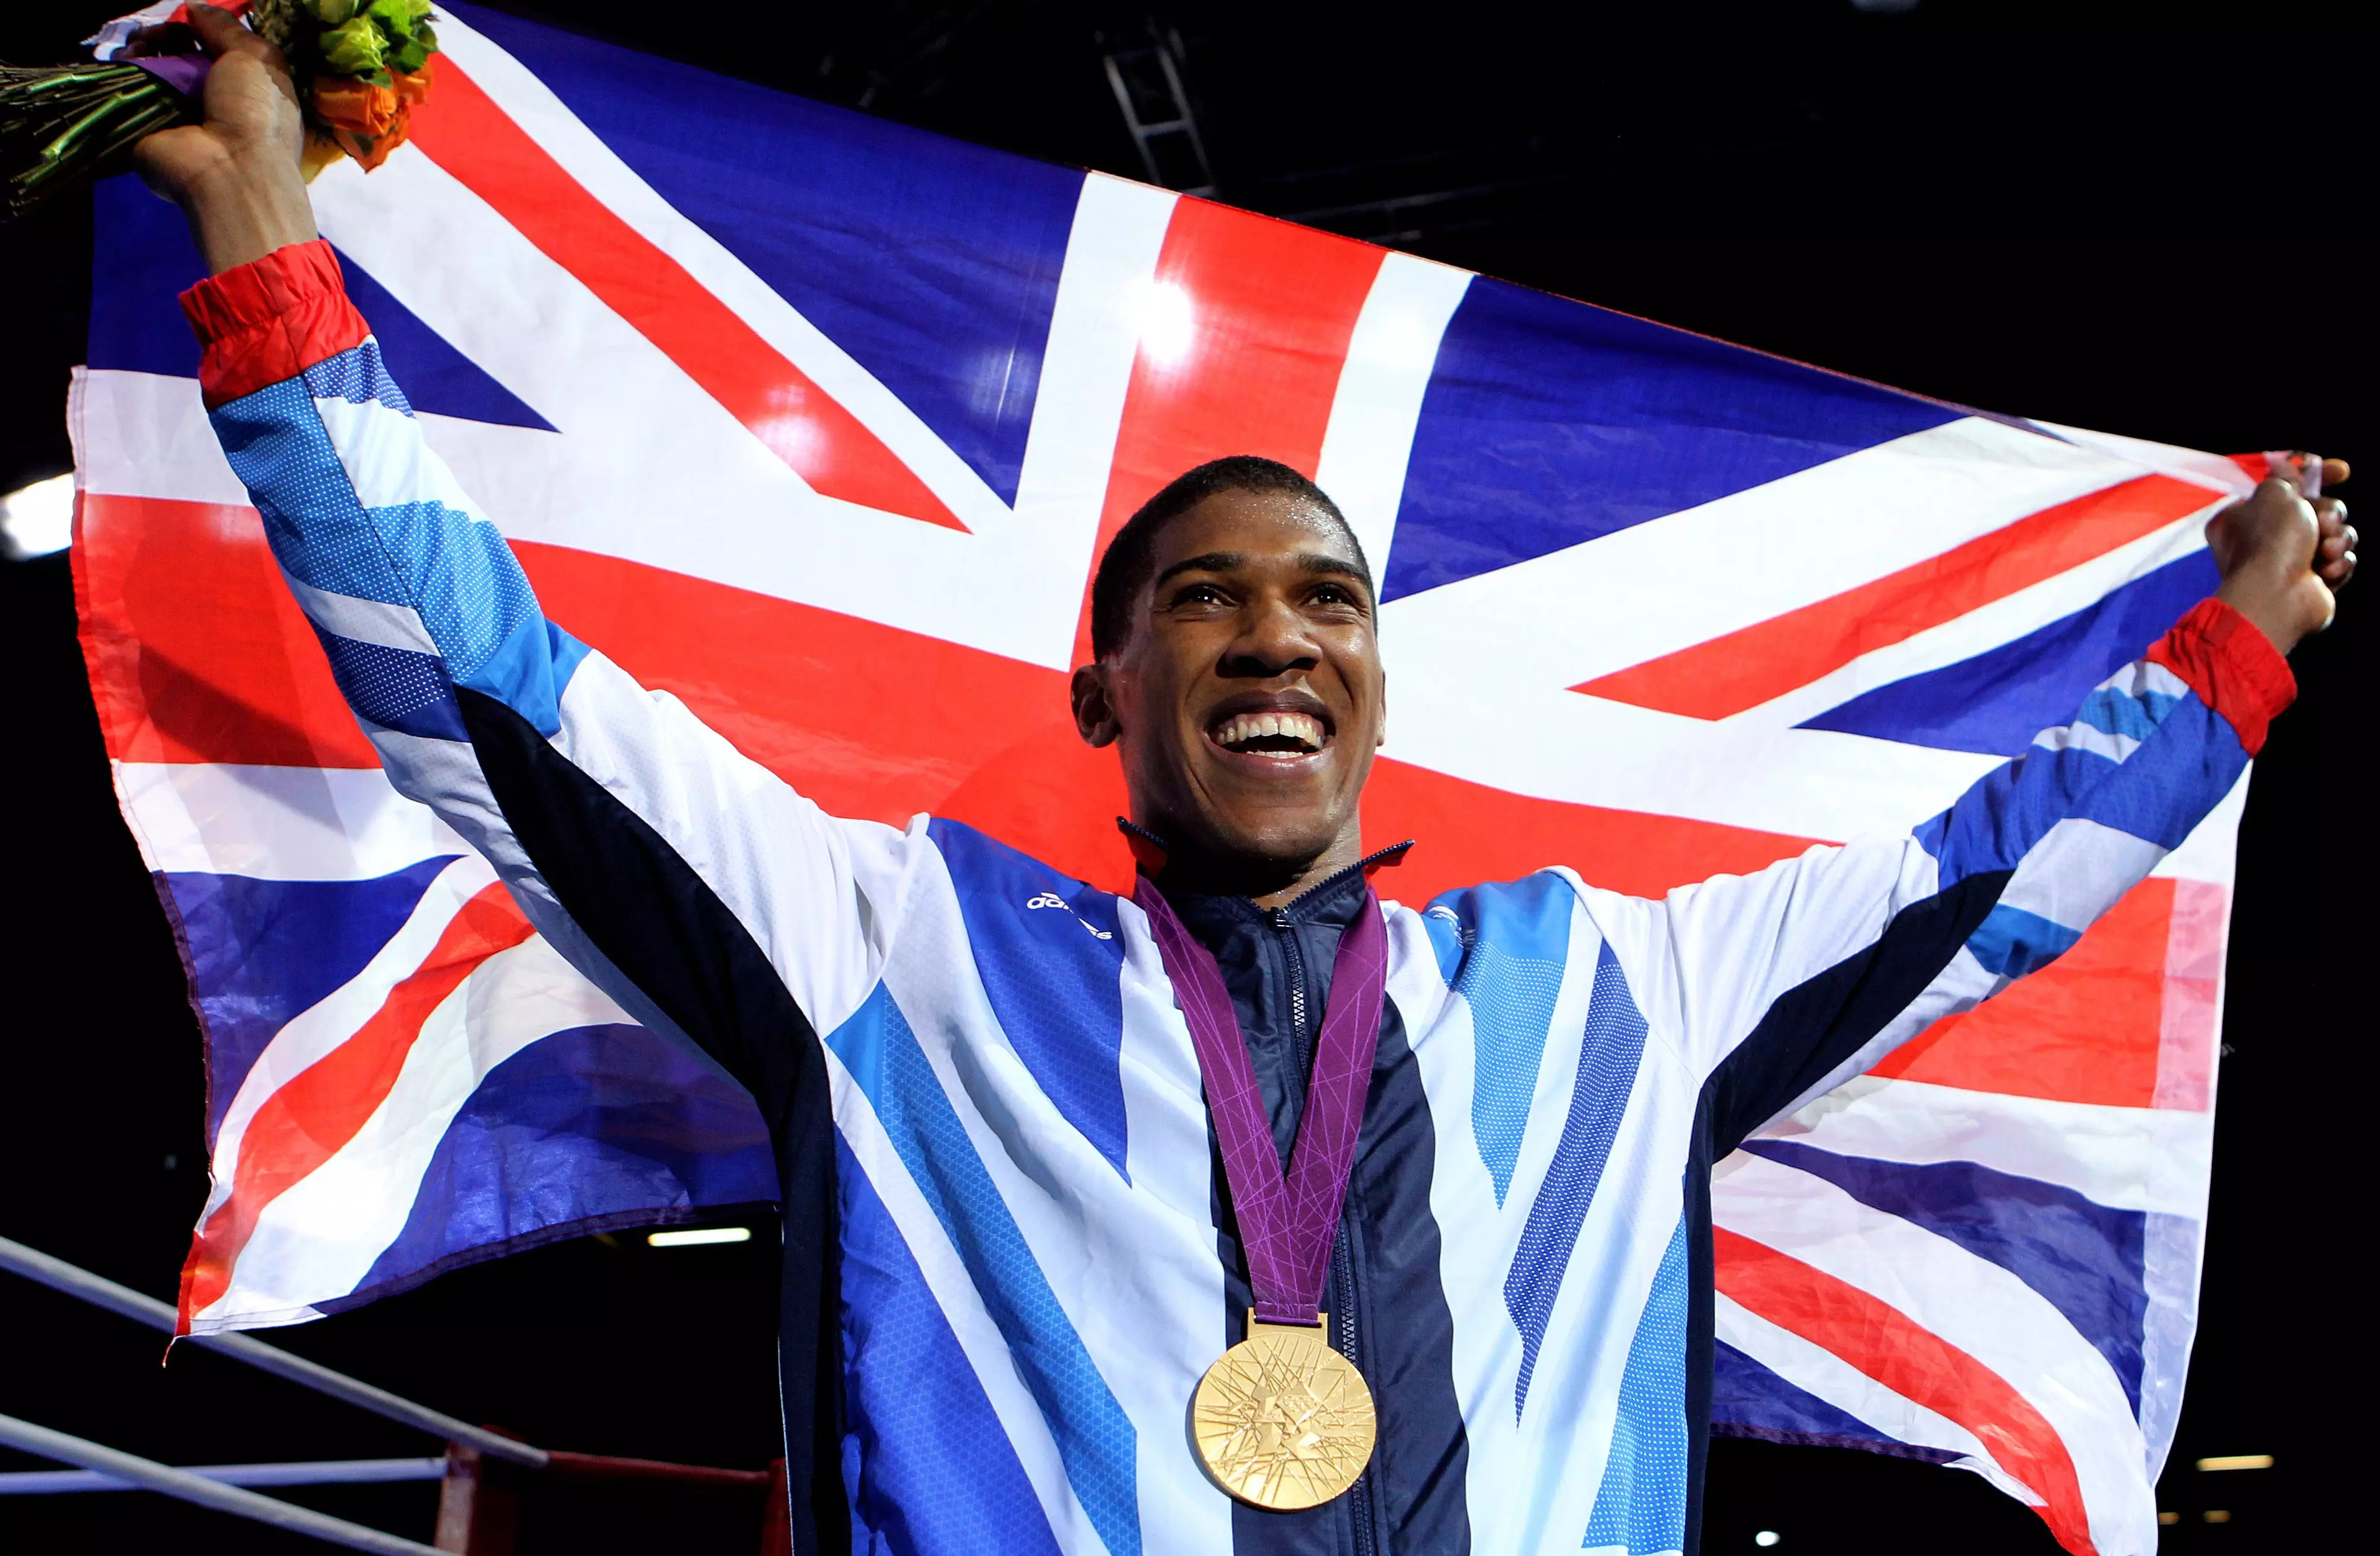 Joshua raises the Union Jack flag with the gold medal around his neck. Image: PA